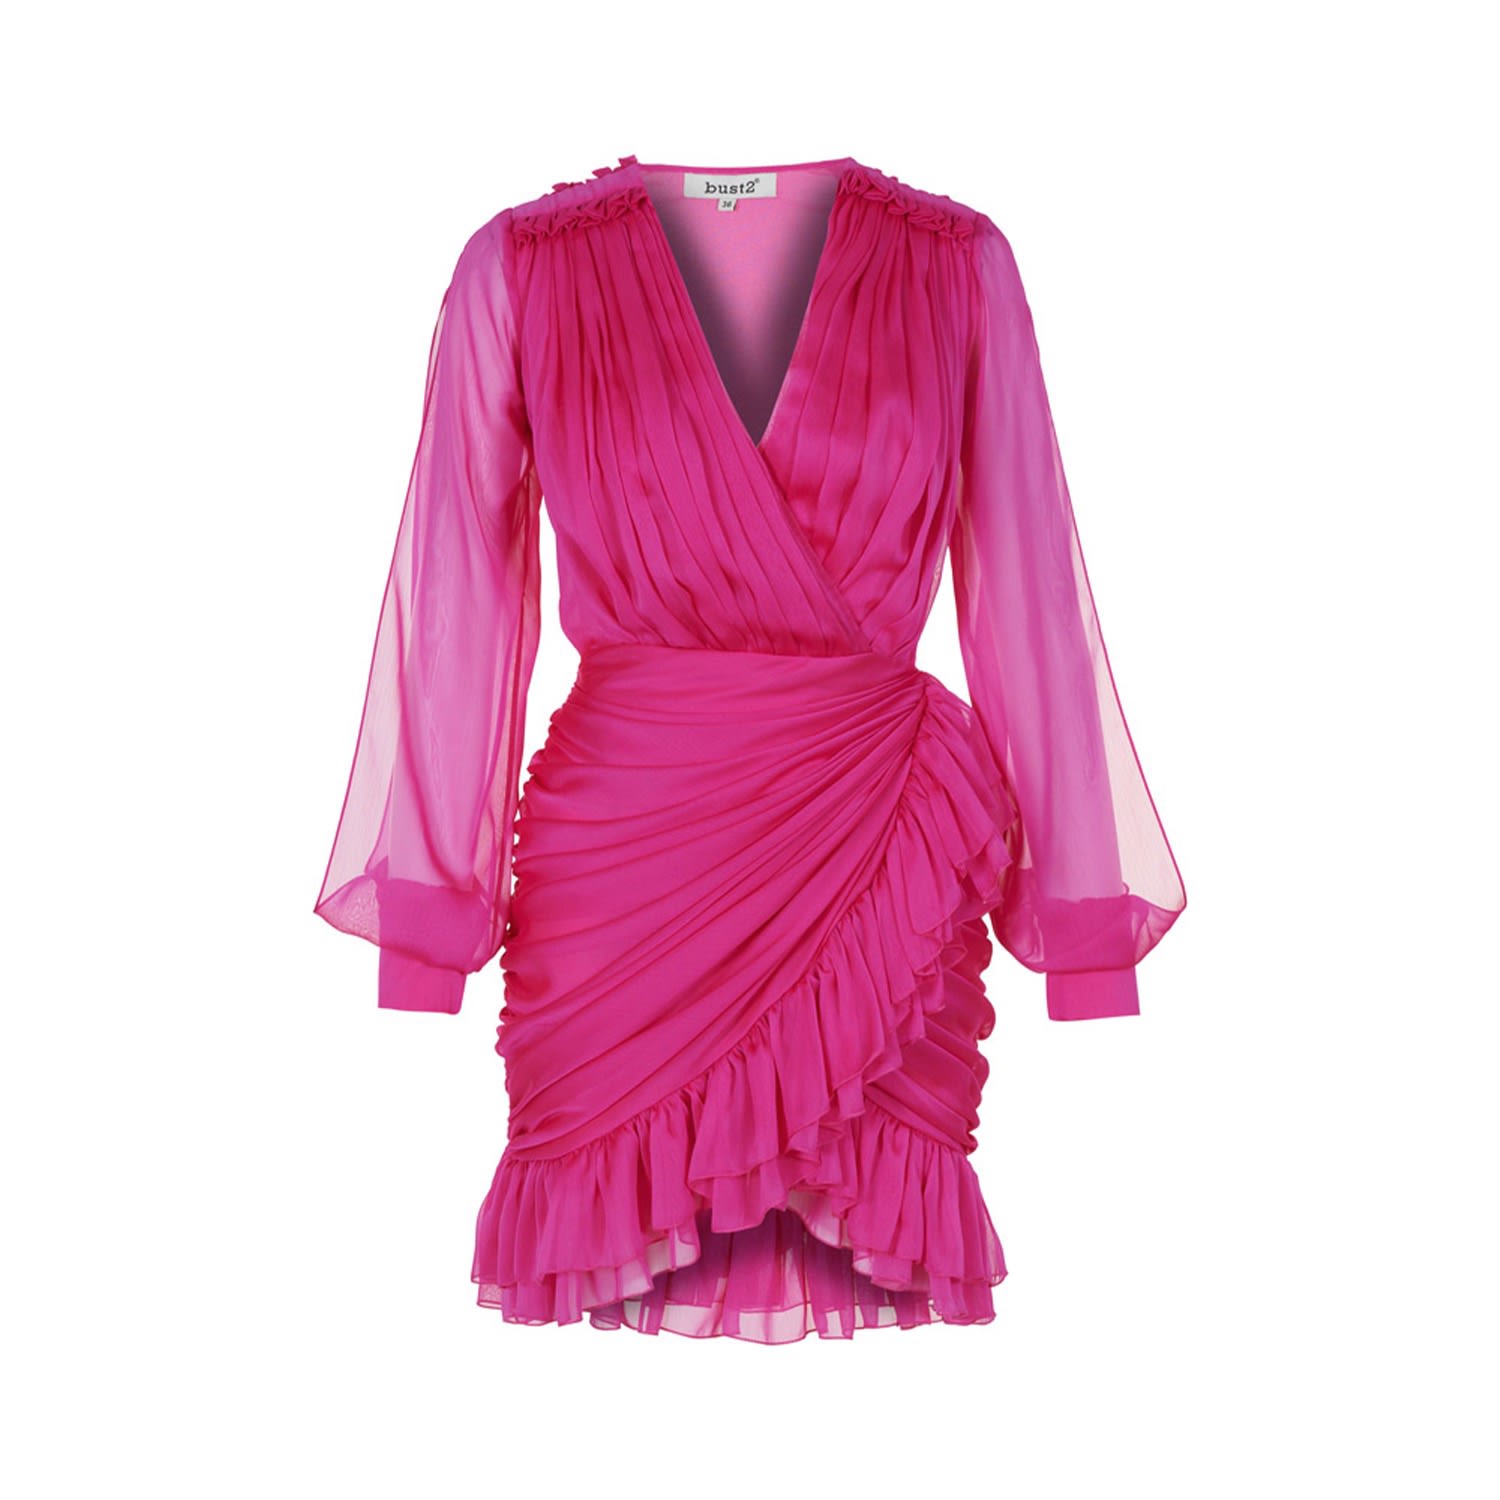 Women’s Pink / Purple Candy Pink Draped Dress - Valentine’s Day Edition Extra Small Bust2